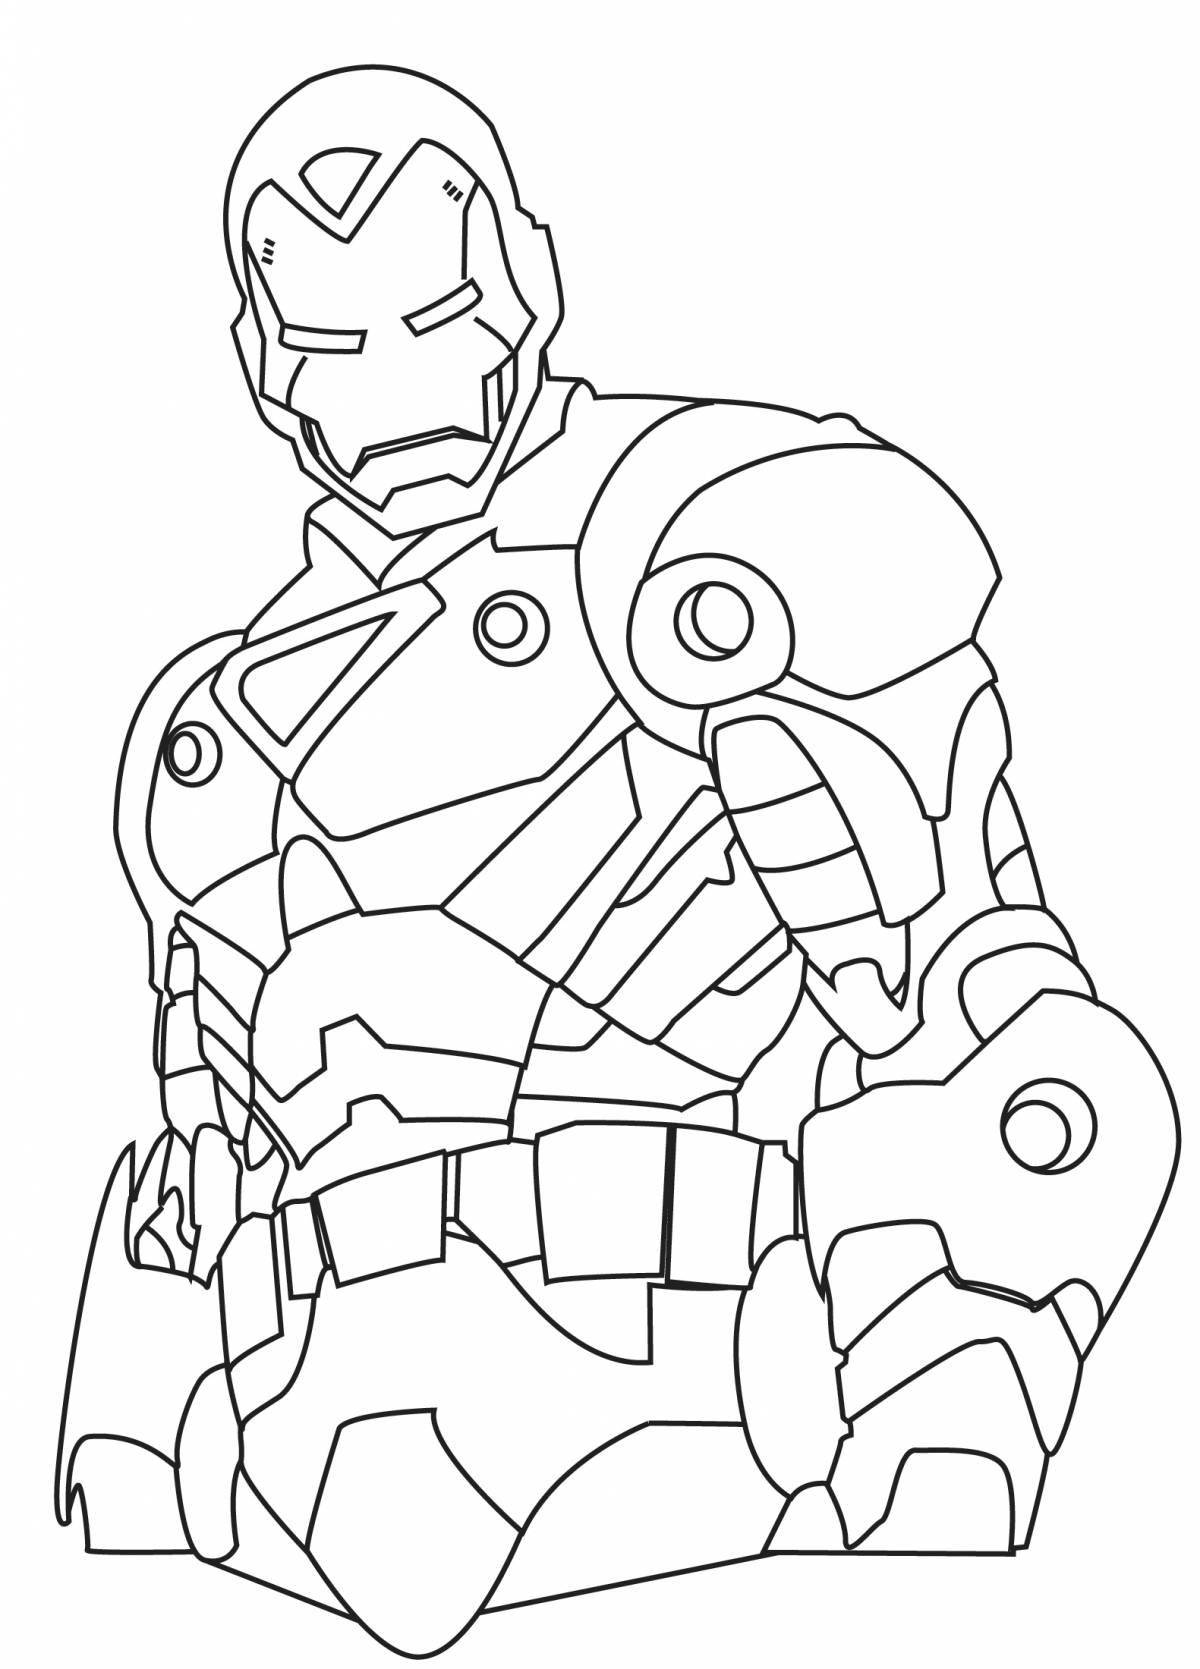 Incredible iron man coloring book for kids